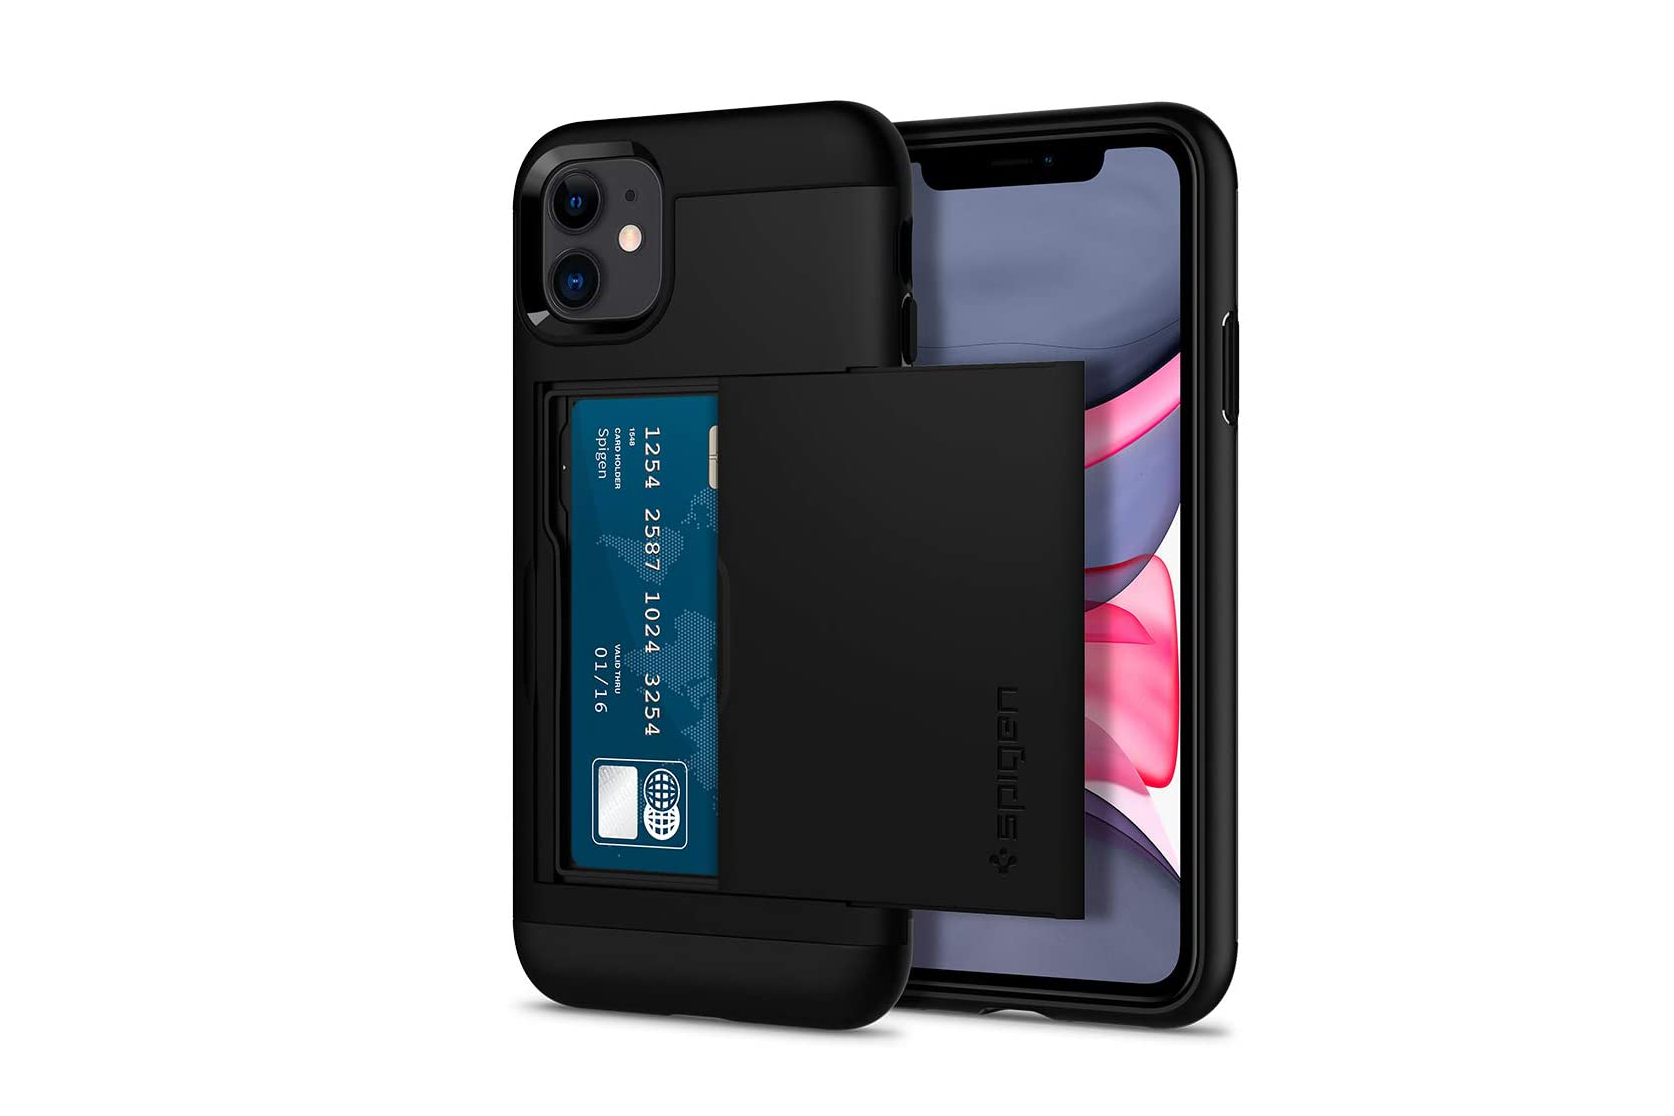  The best iPhone 11 wallet cases and covers